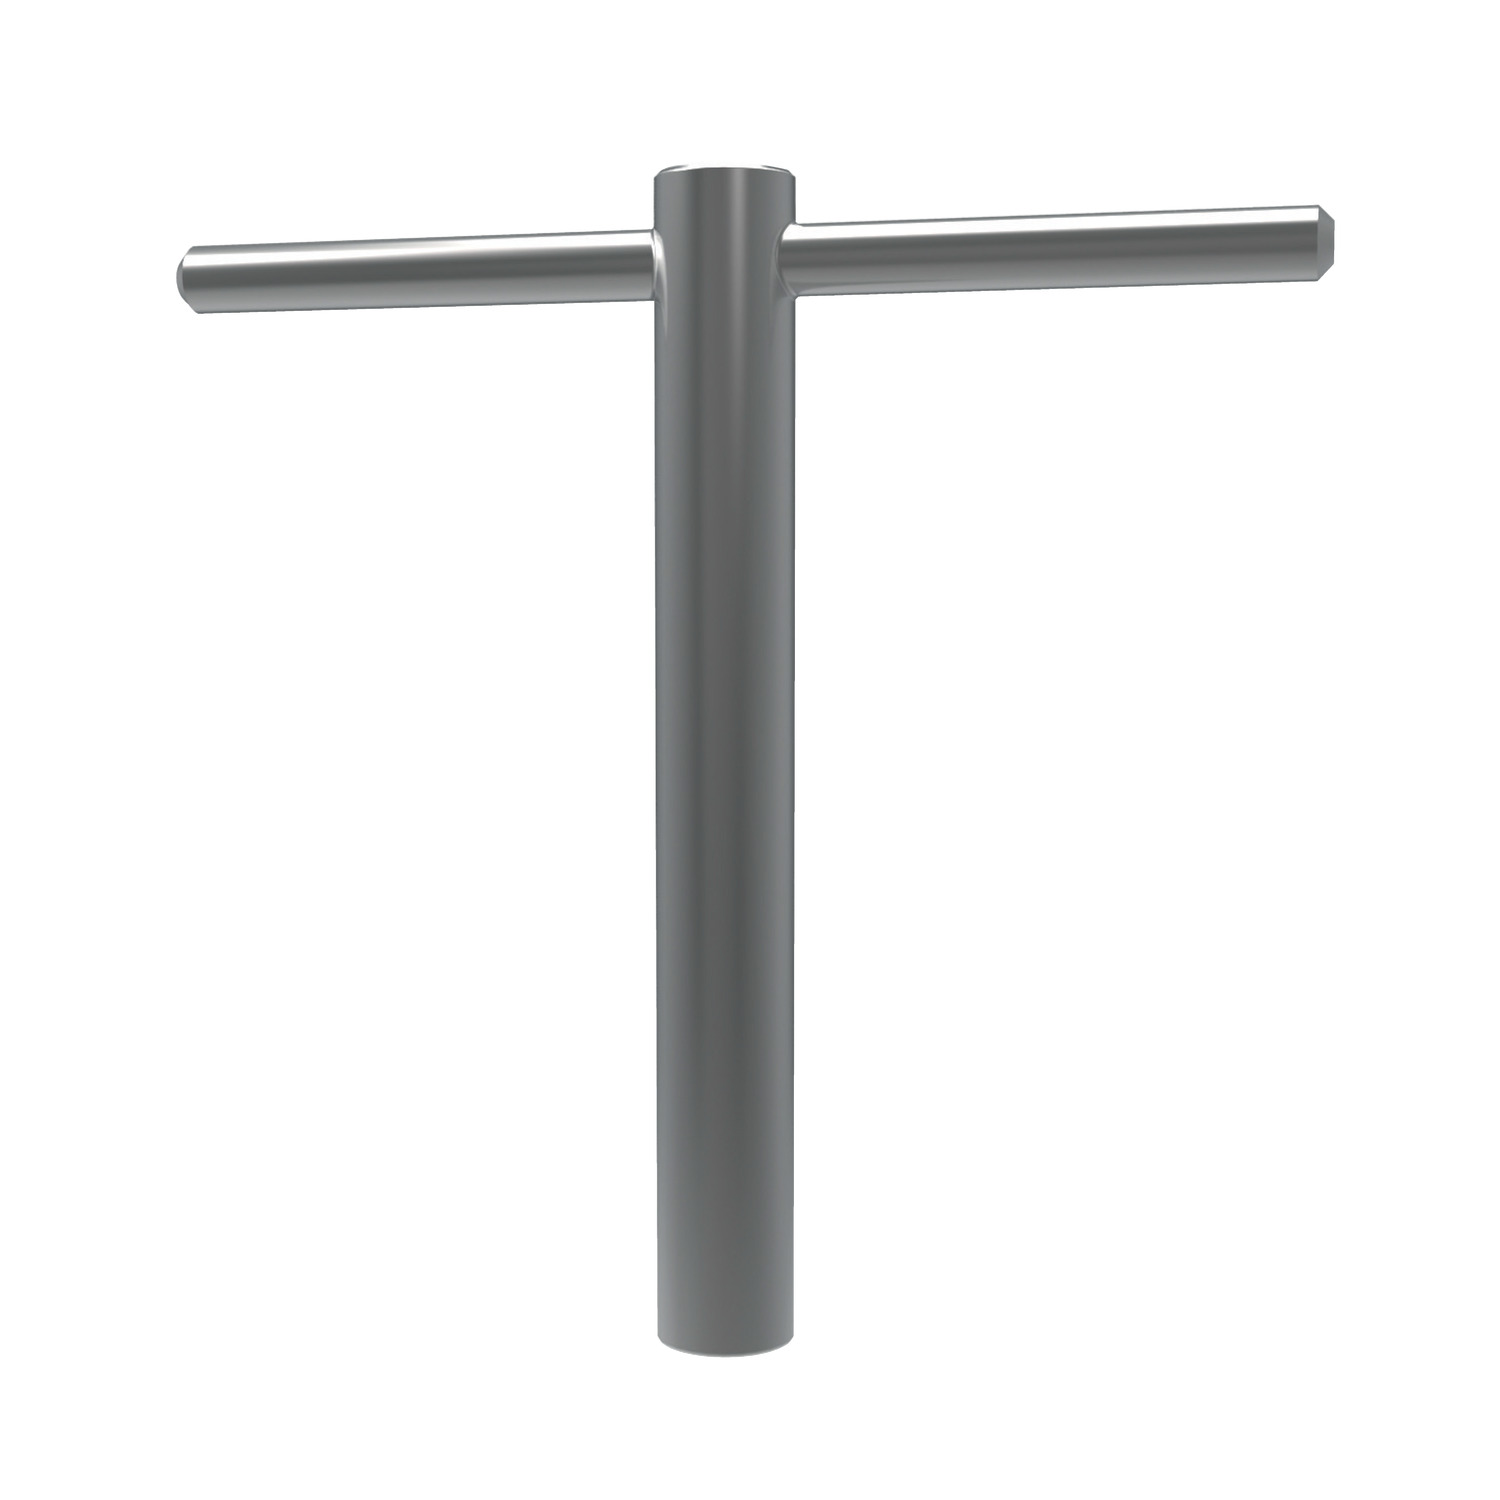 92010.W0012 T-Wrench, Square Drive (Long) - Steel. 12 - 24 - 12,0 - 200